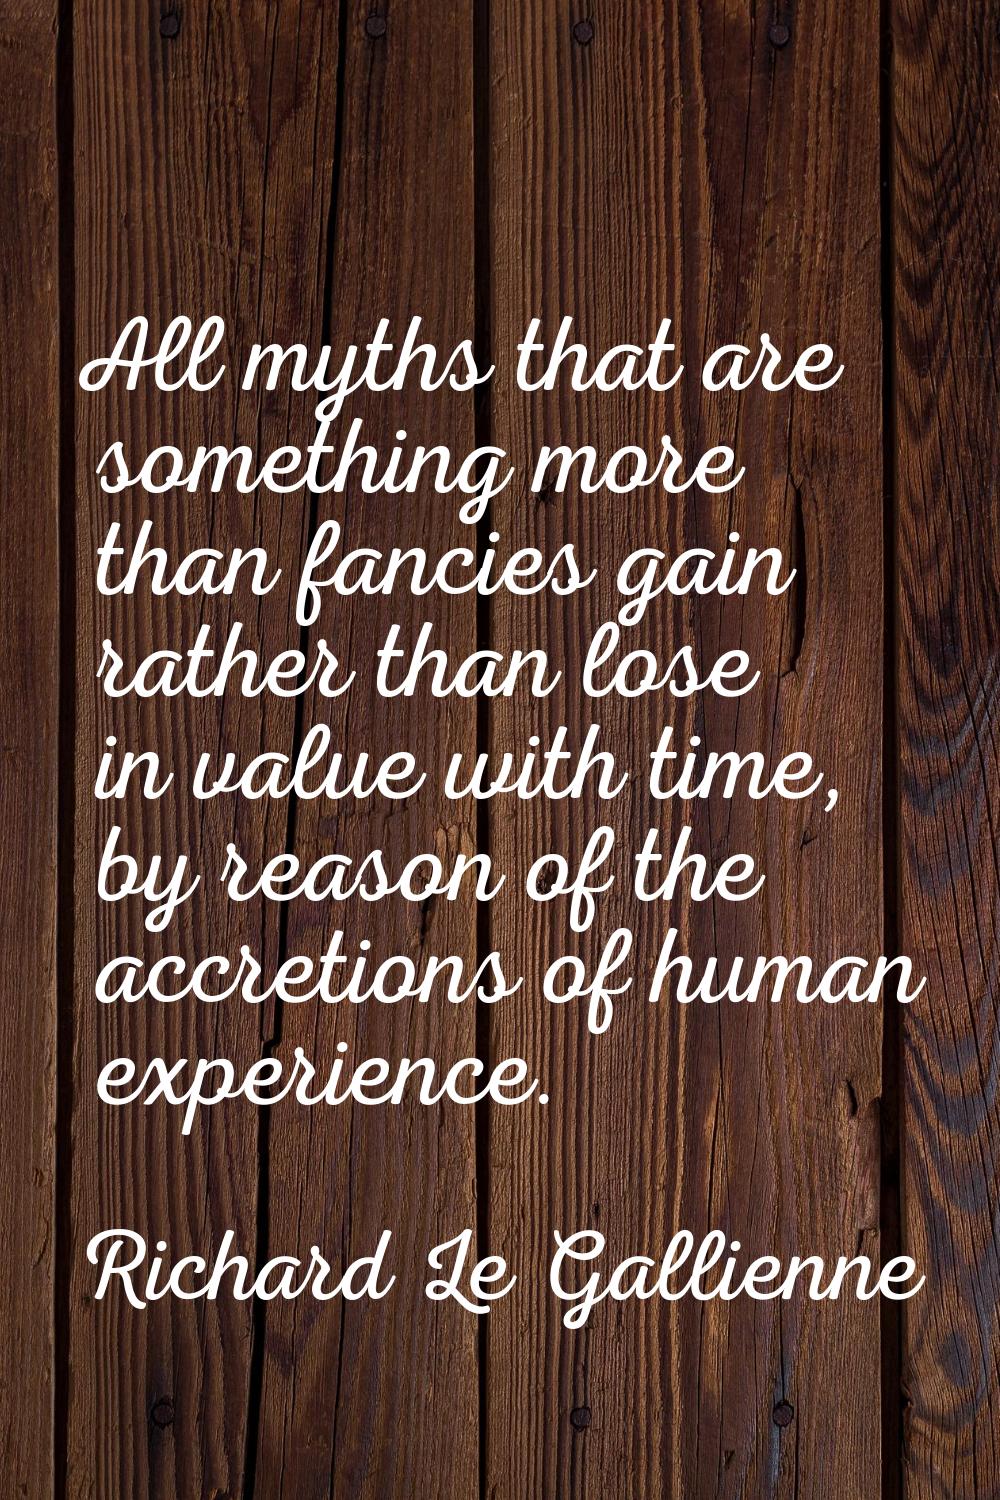 All myths that are something more than fancies gain rather than lose in value with time, by reason 